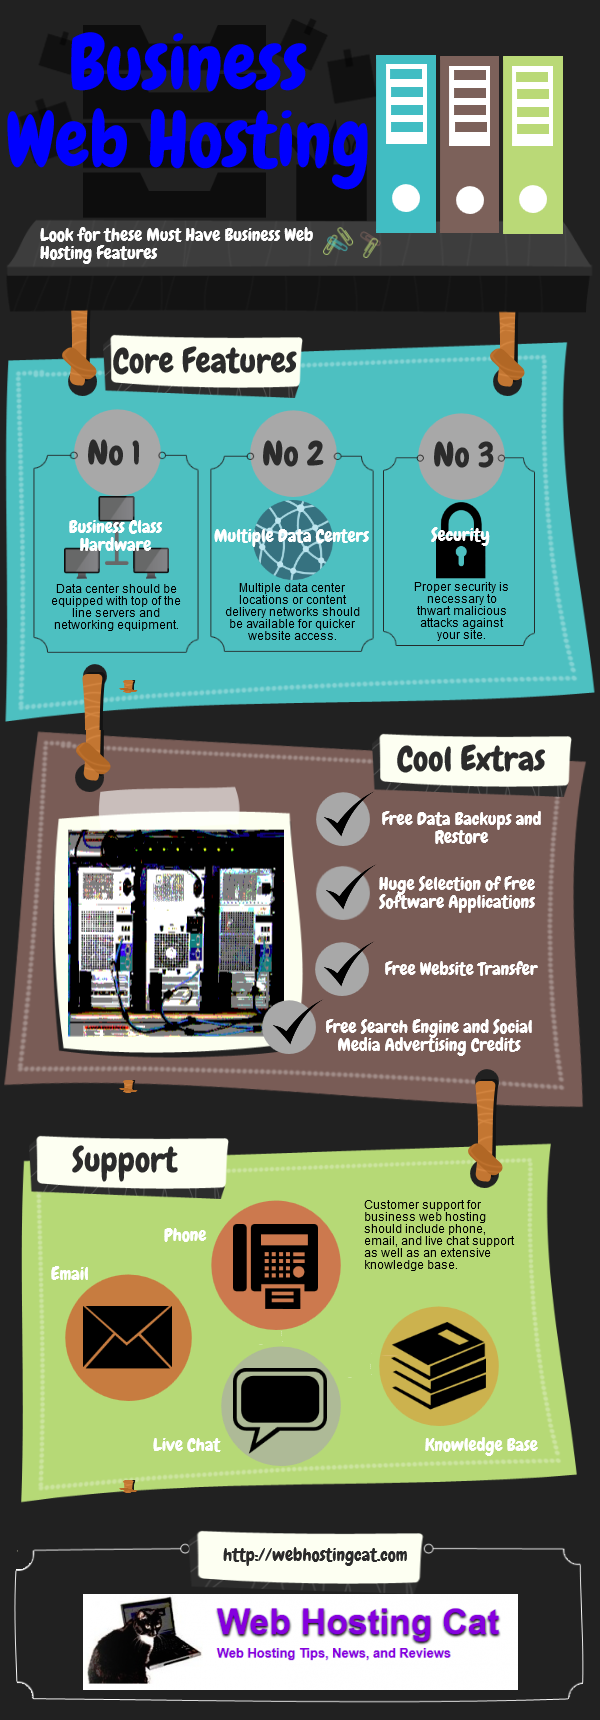 Business Web Hosting Infographic